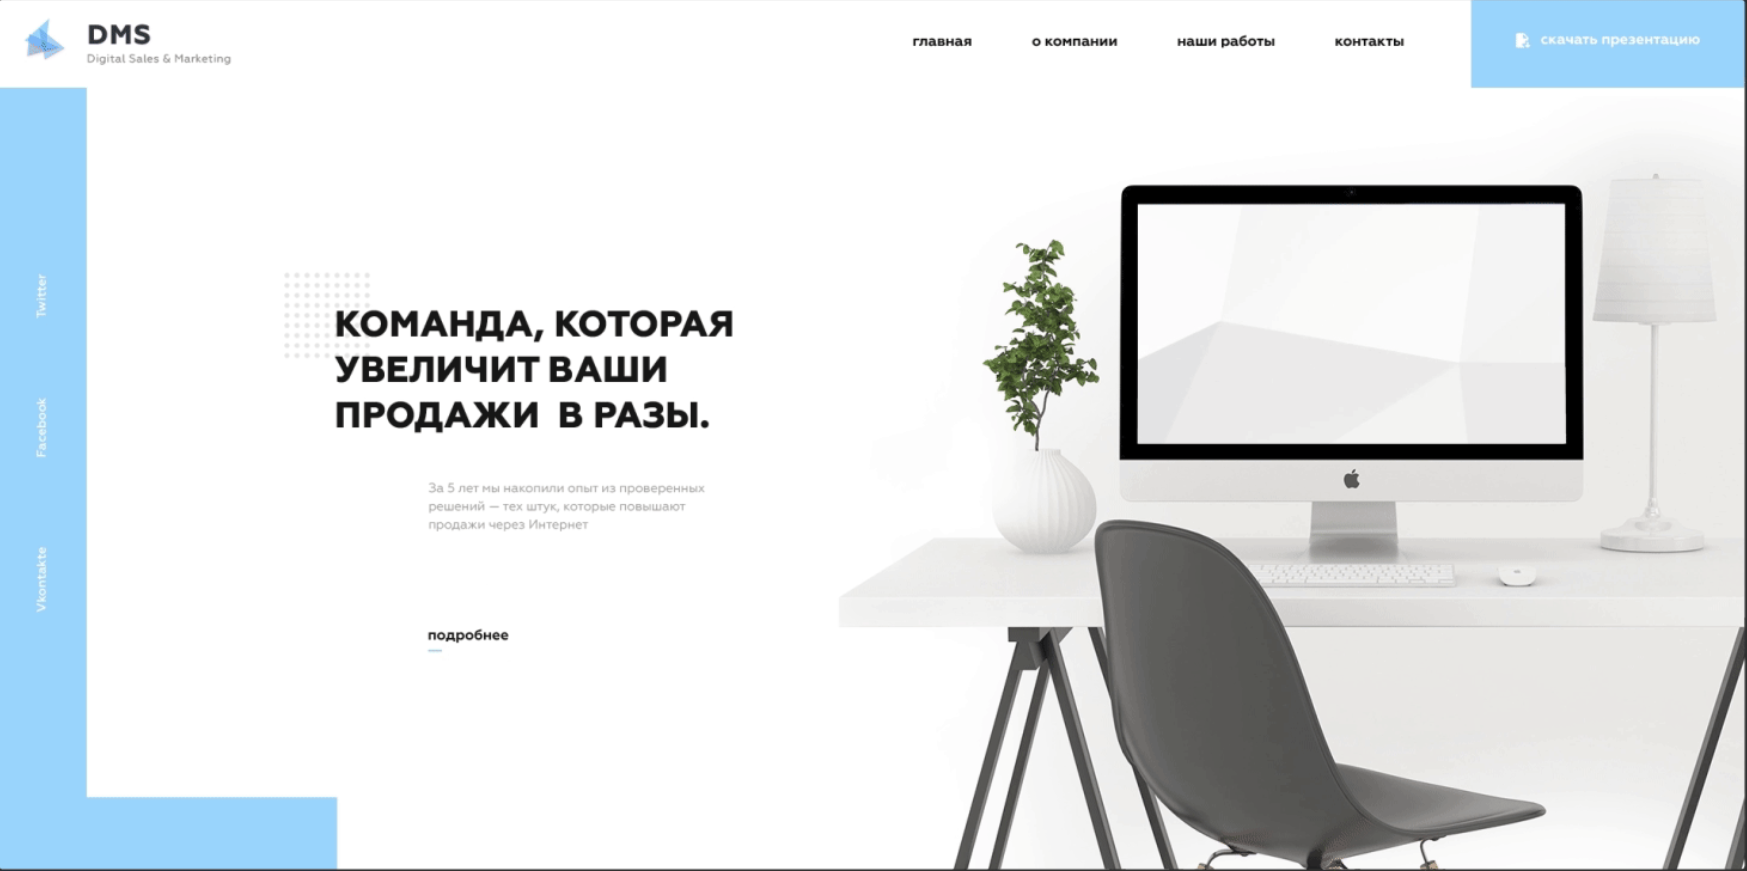 4. Mẫu thiết kế website Giới thiệu công ty - Marketing - Sale 04 behance_net/gallery/77606111/Mini-project-Landing-Page-for-Moscow-Digital-Agency